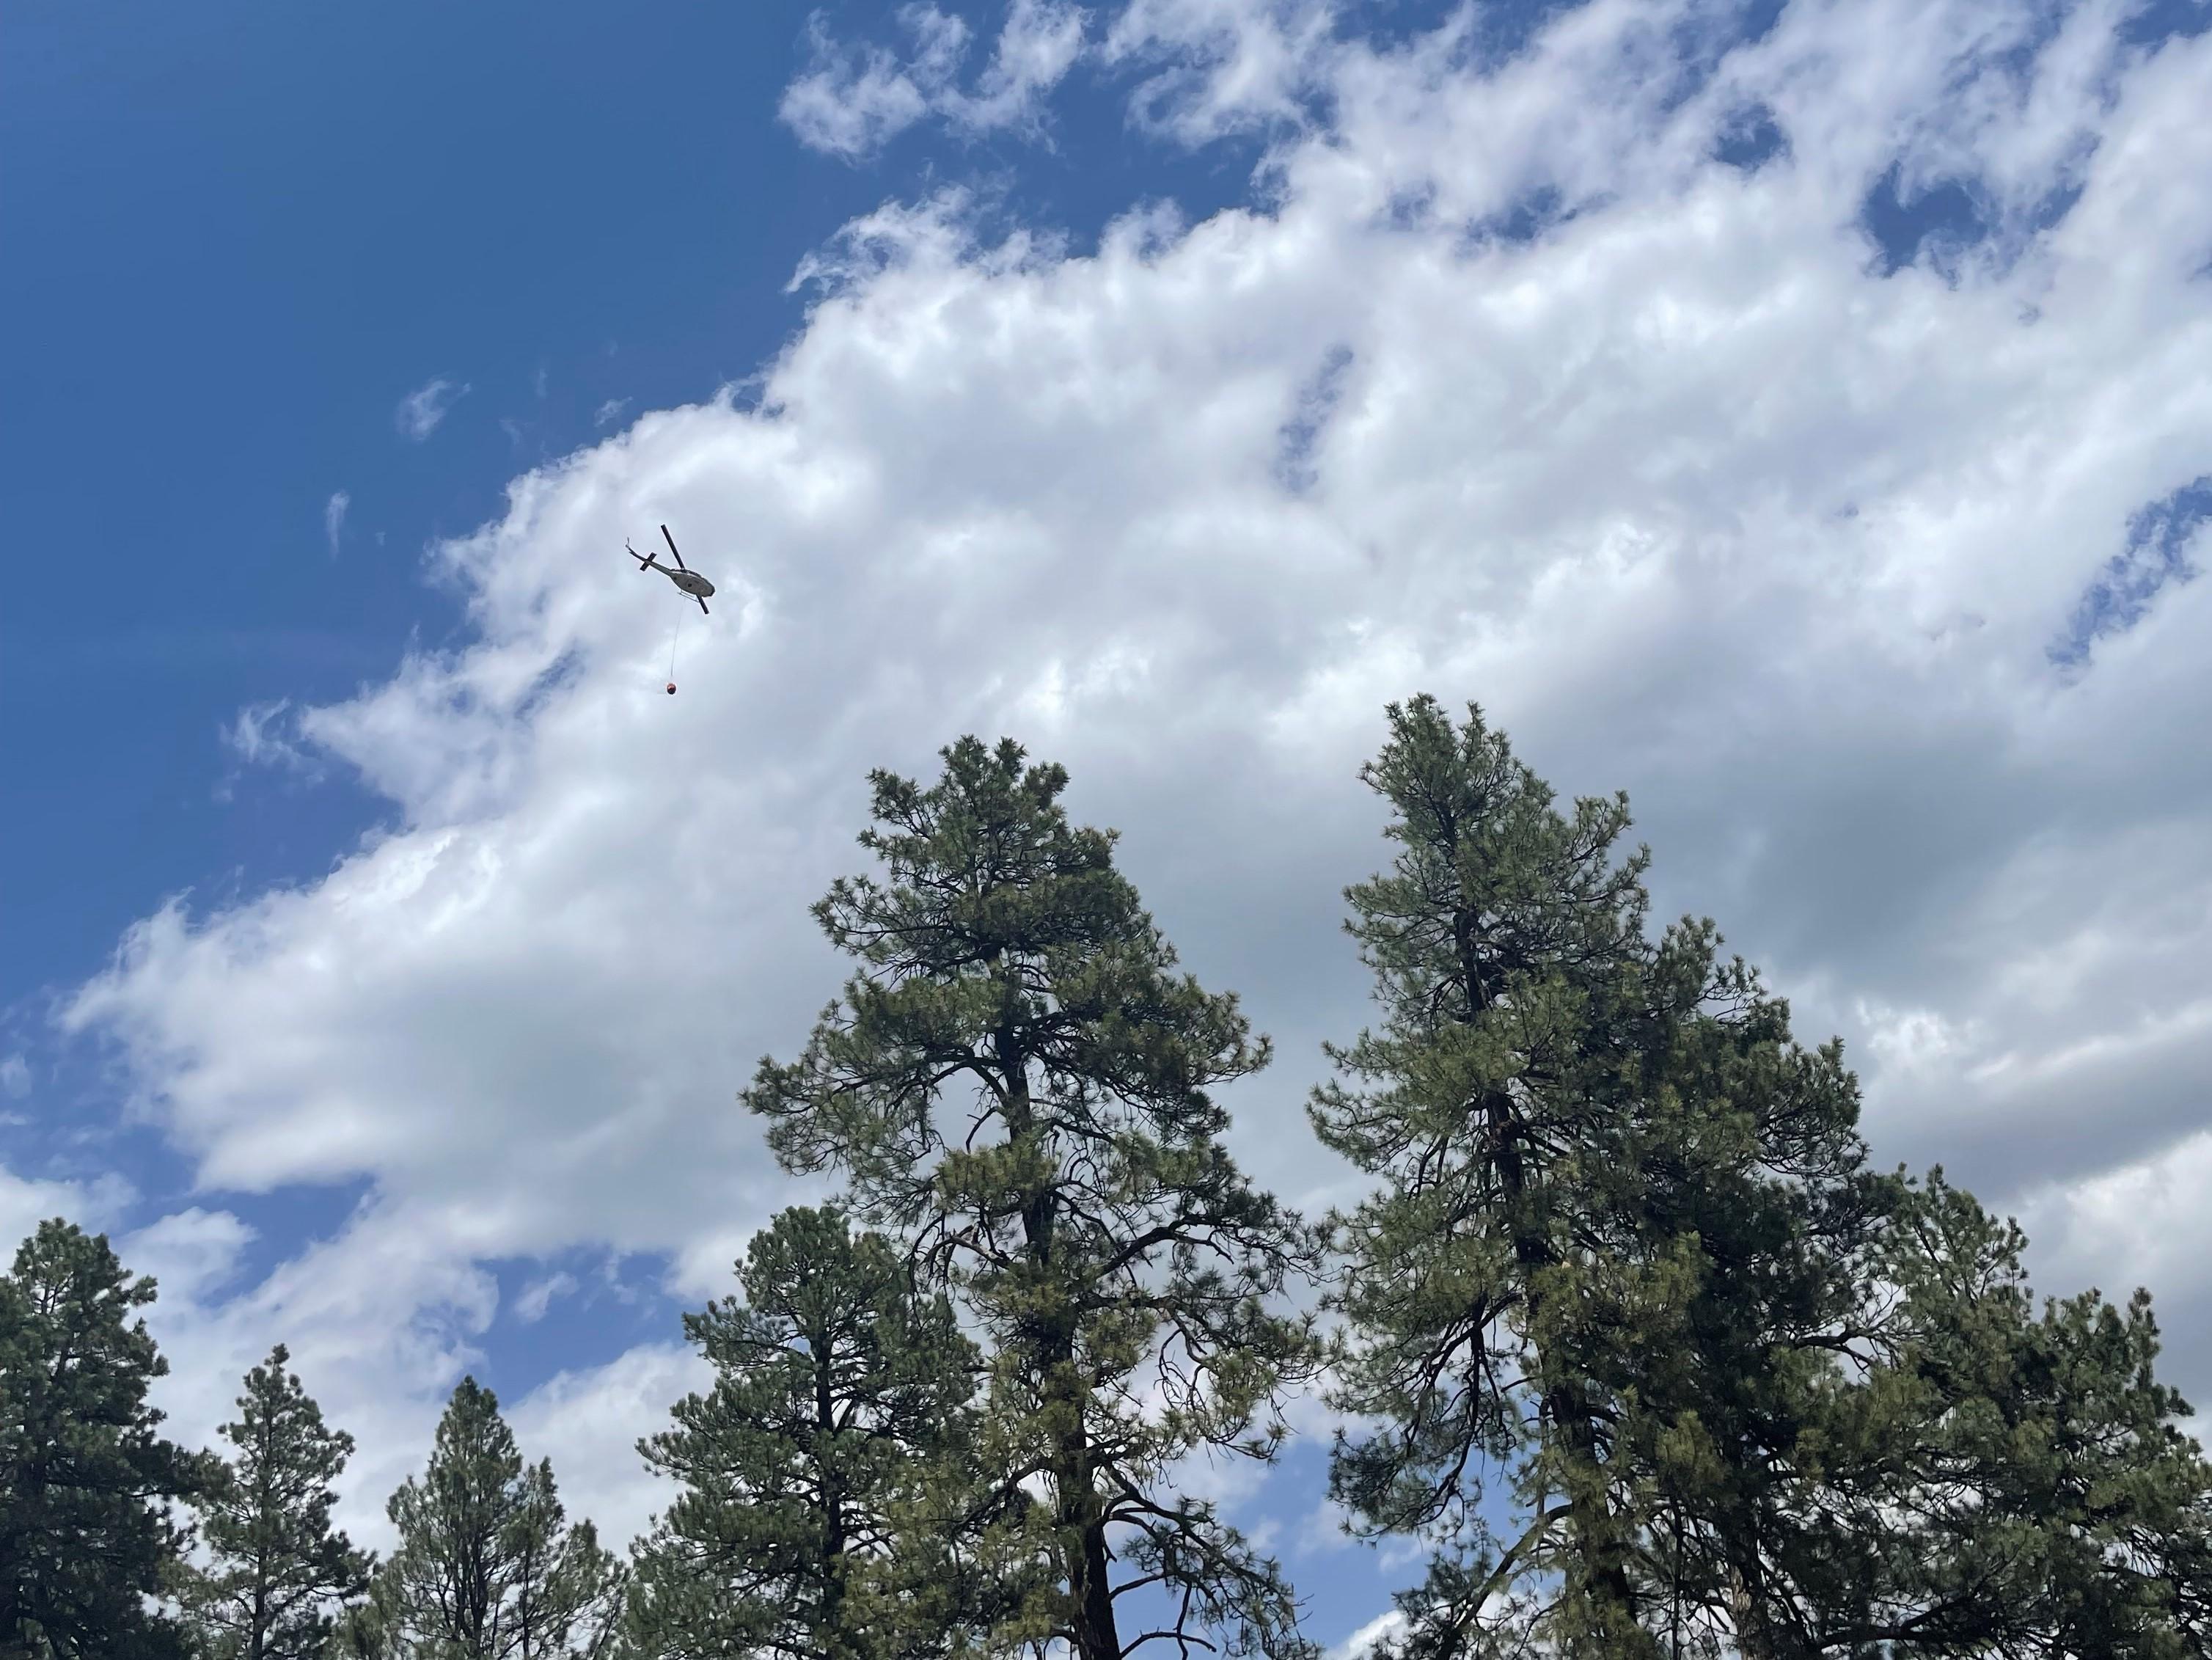 Blue sky, trees, and cloud dominate the view. A medium-heavy helicopter carries a full bucket of water.